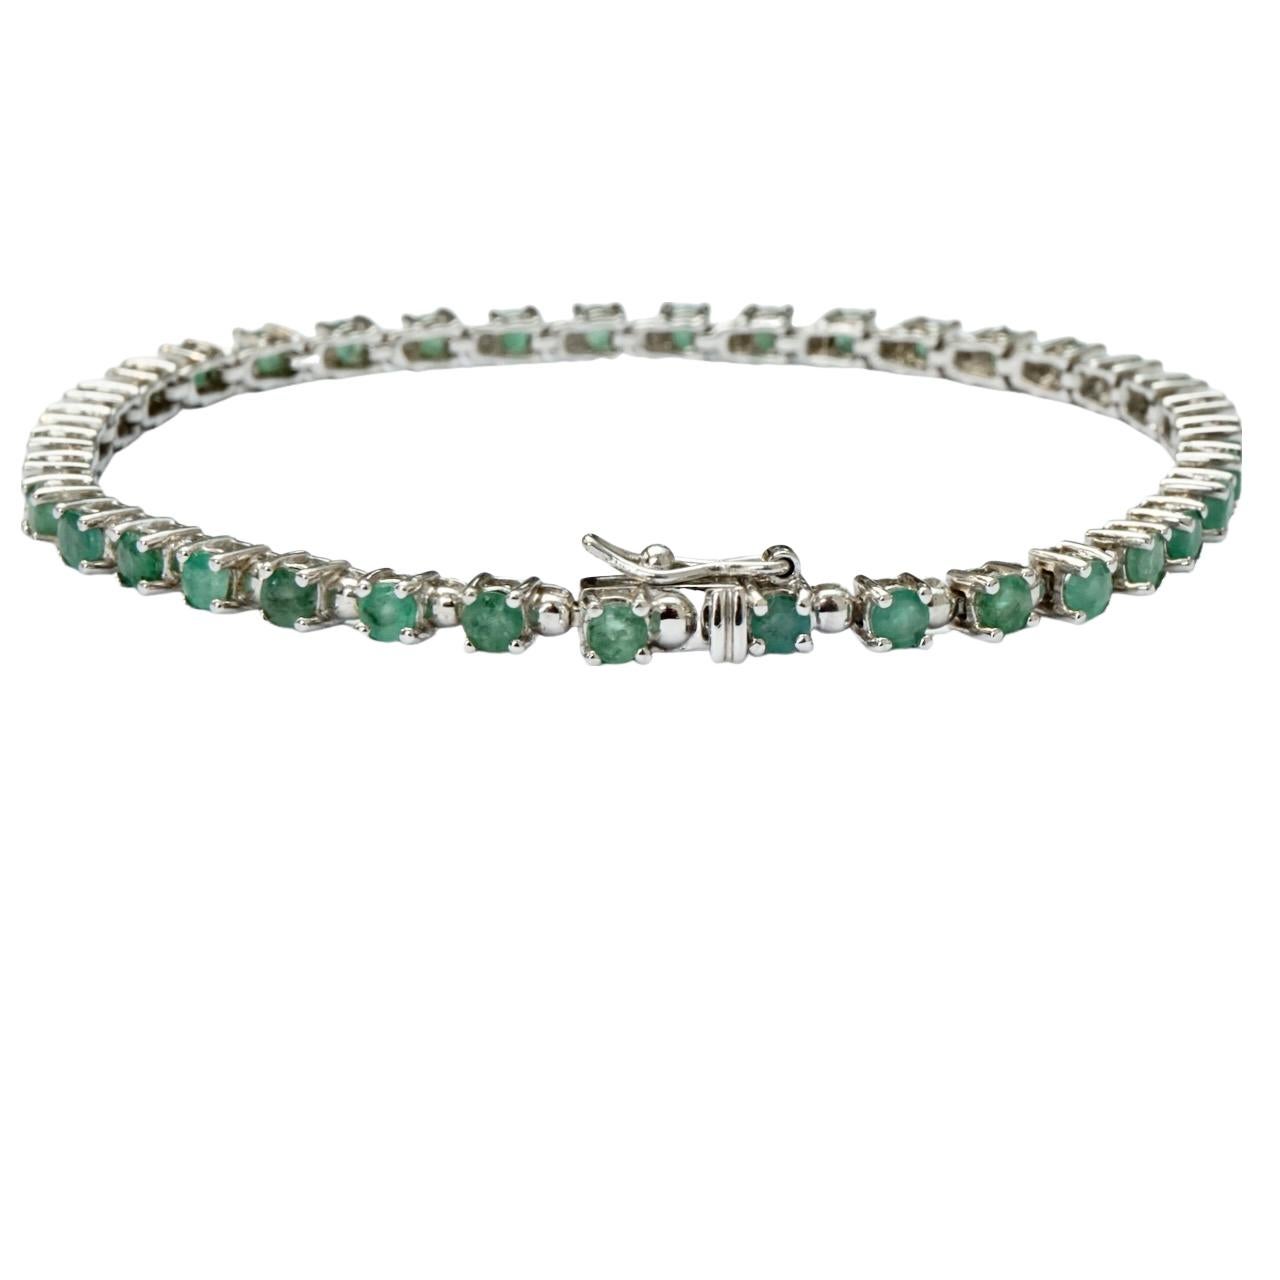 Beautiful sterling silver tennis bracelet with a safety catch, set with a row of pale green emeralds. Measuring length 19.3 cm / 7.6 inches by width 2.5 mm / .1 inch, and depth 3.5 mm / .13 inch.

This is a classic tennis bracelet set with emeralds.